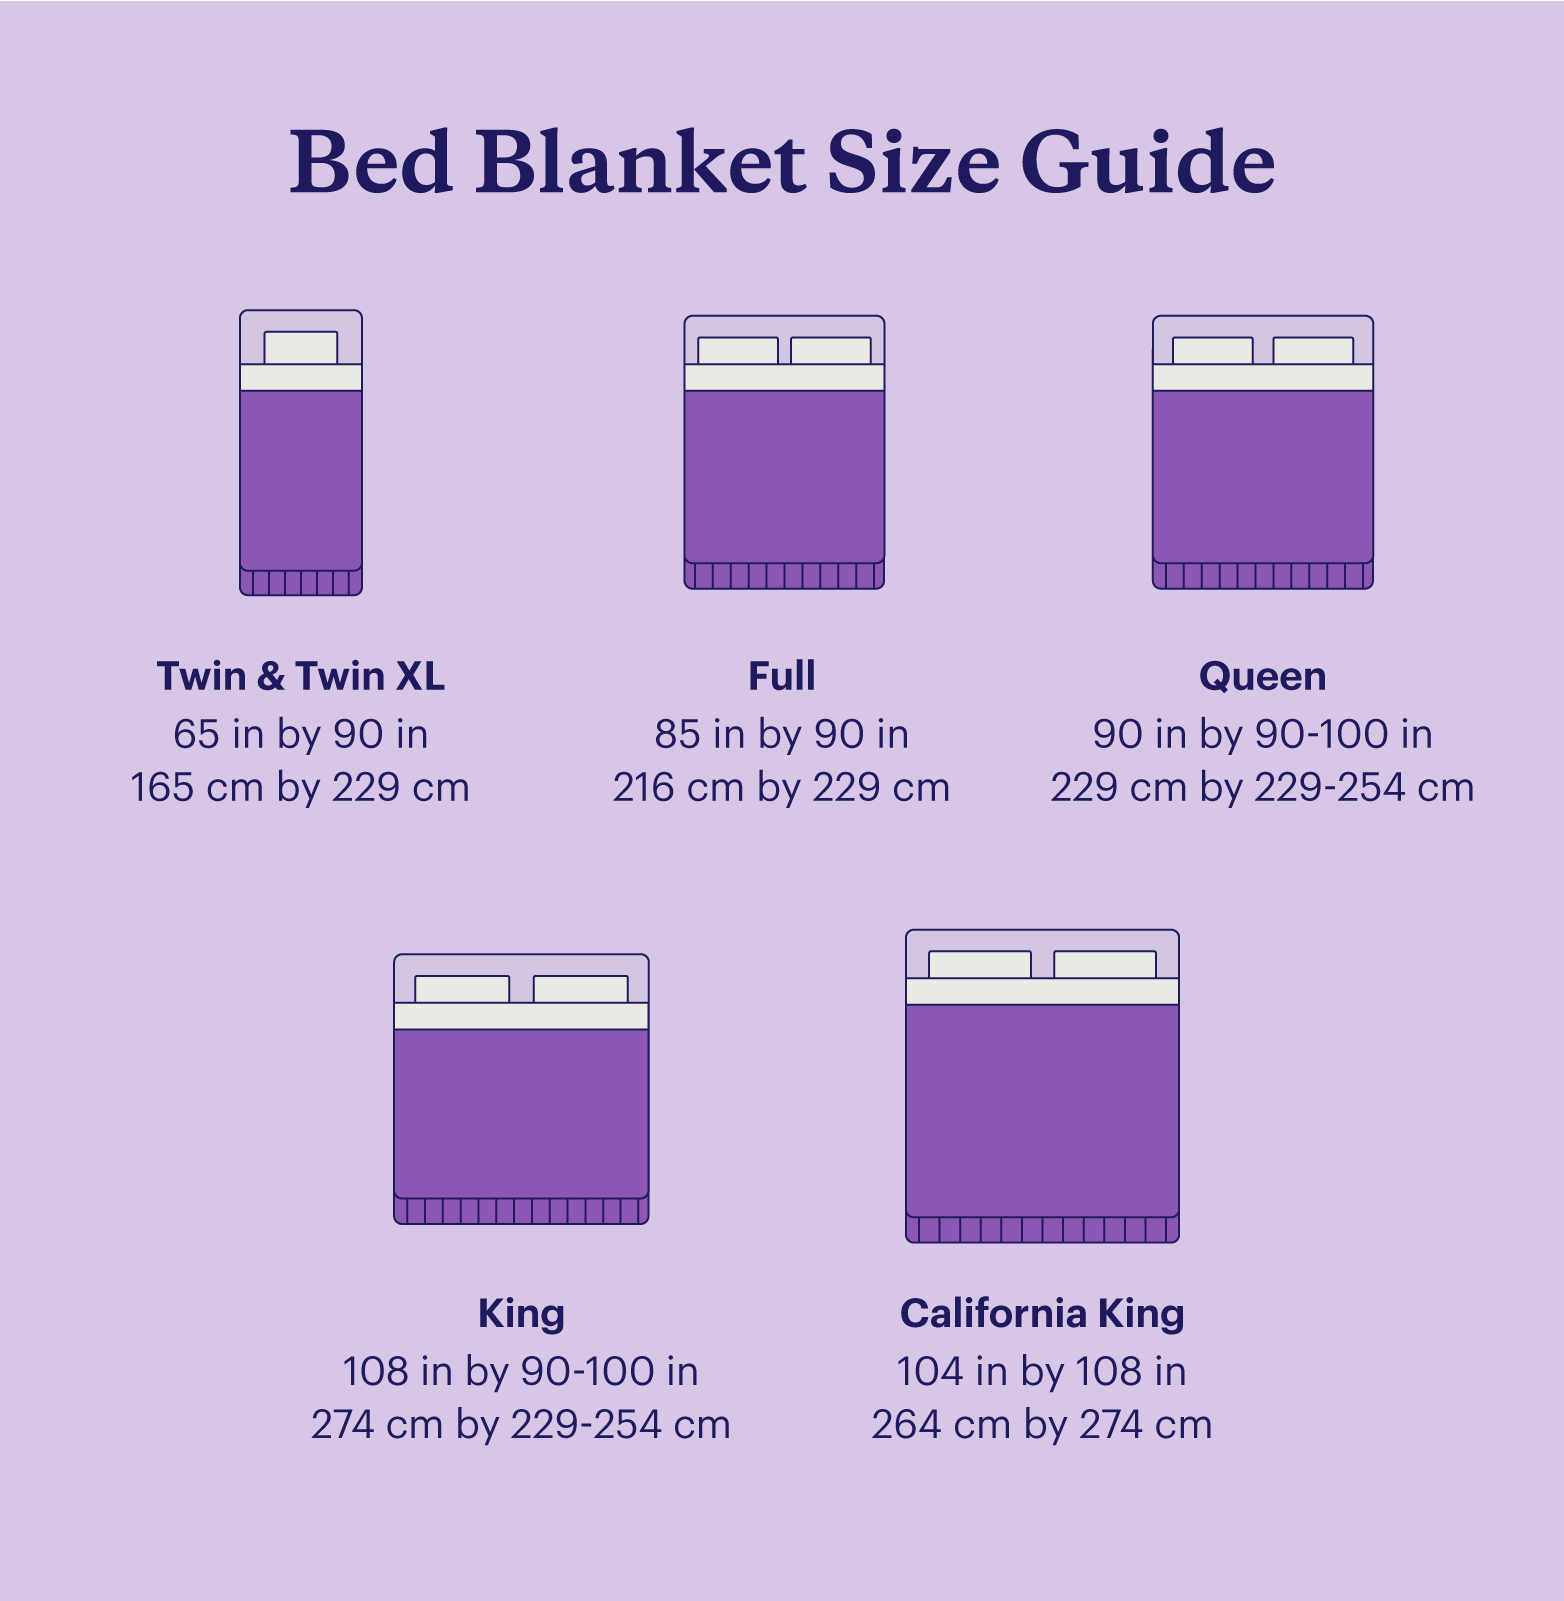 Guidelines for Standard Bed and Blanket Sizes